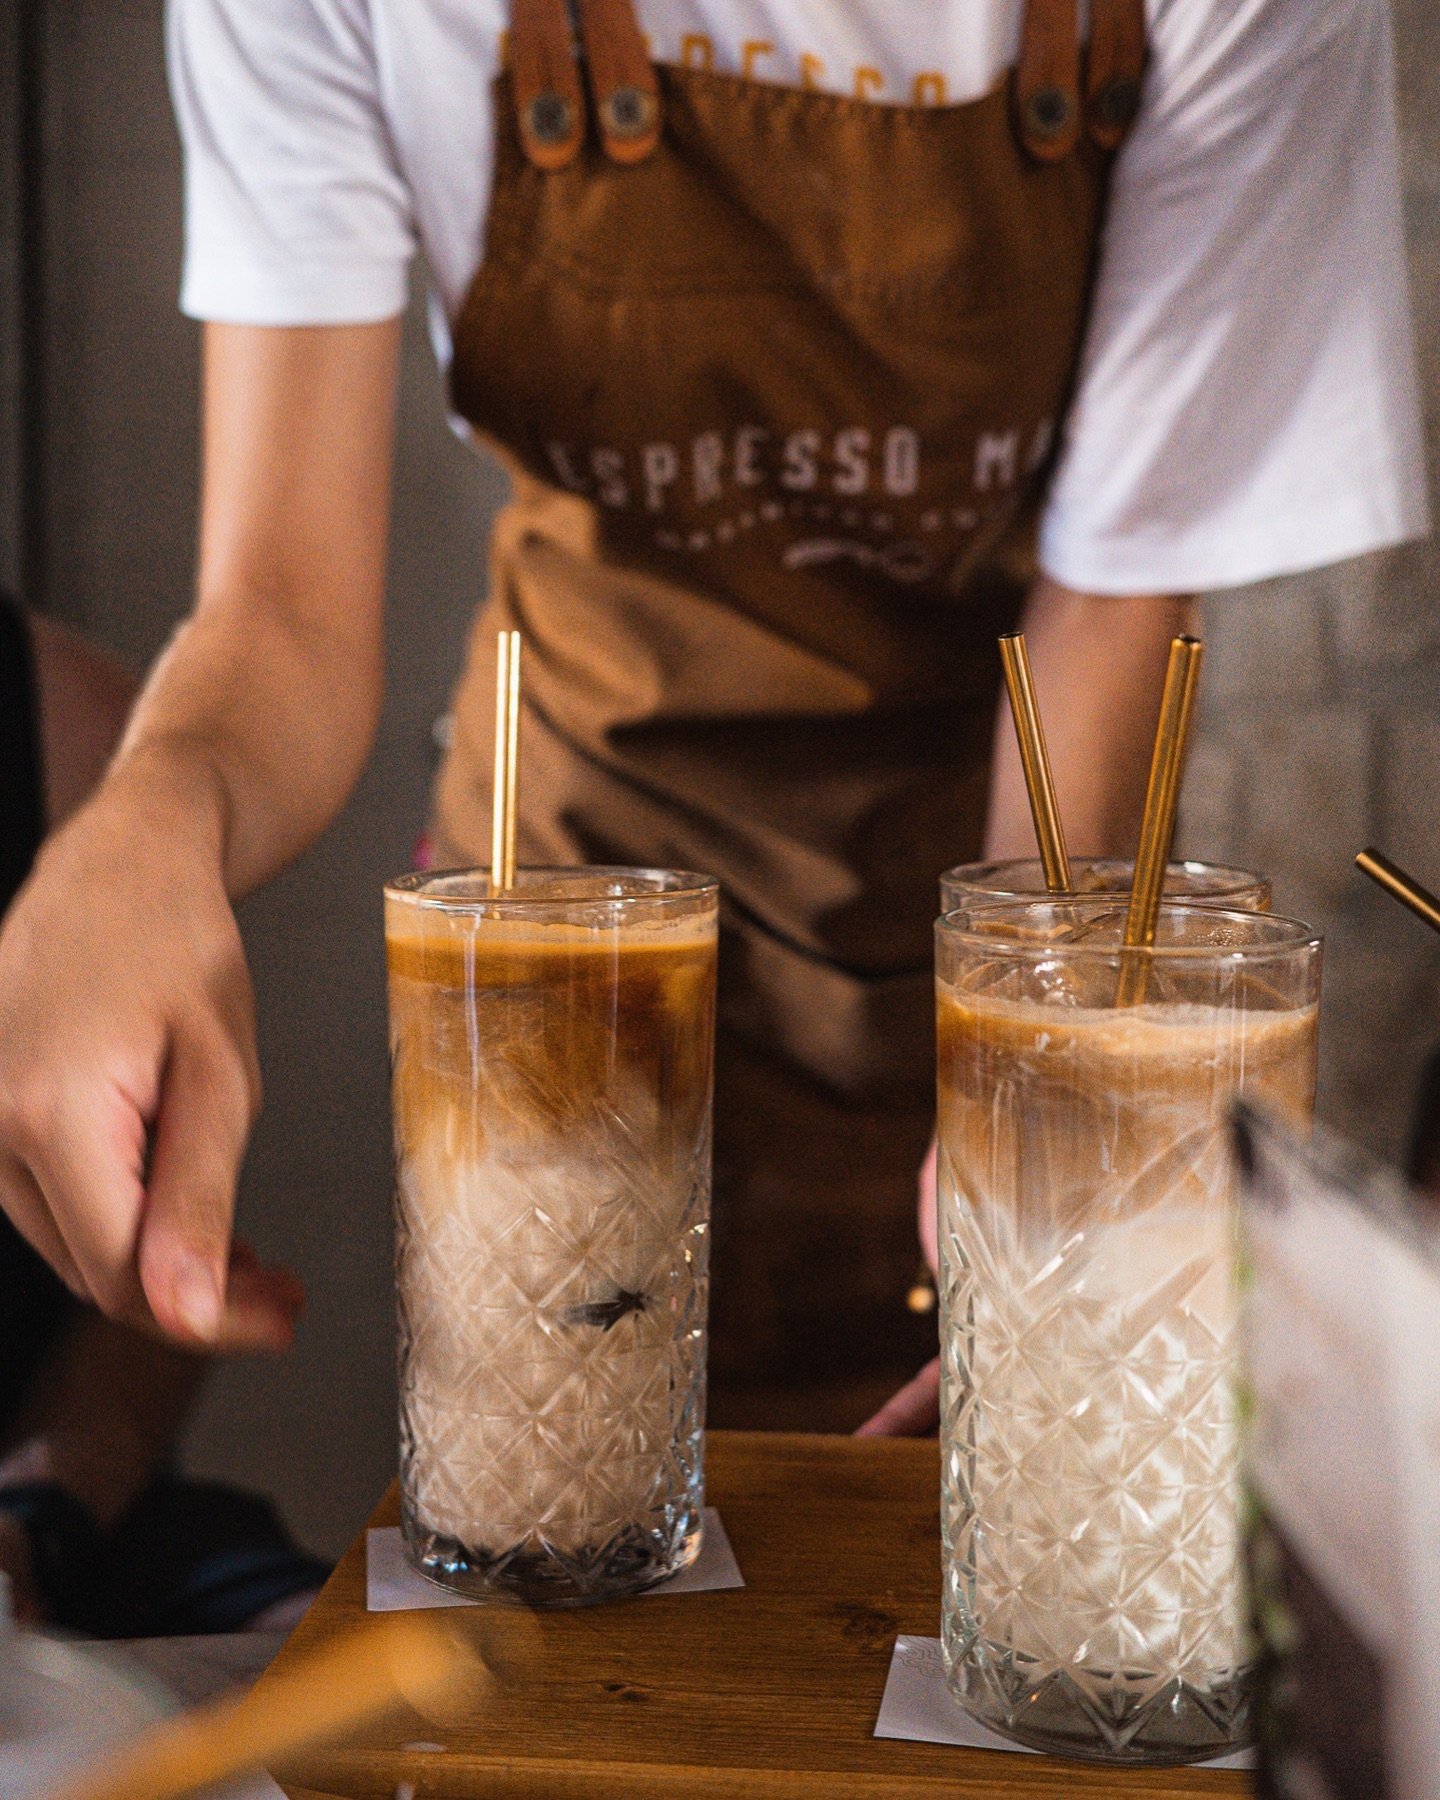 Iced season is here!

All of our coffees can be served over ice. 

They also make a wonderful little clinky clinky sound when you stir them around and the ice hits the metal straw 😏

La temporada de gel &eacute;s aqu&iacute;!

Tots els nostres caf&e